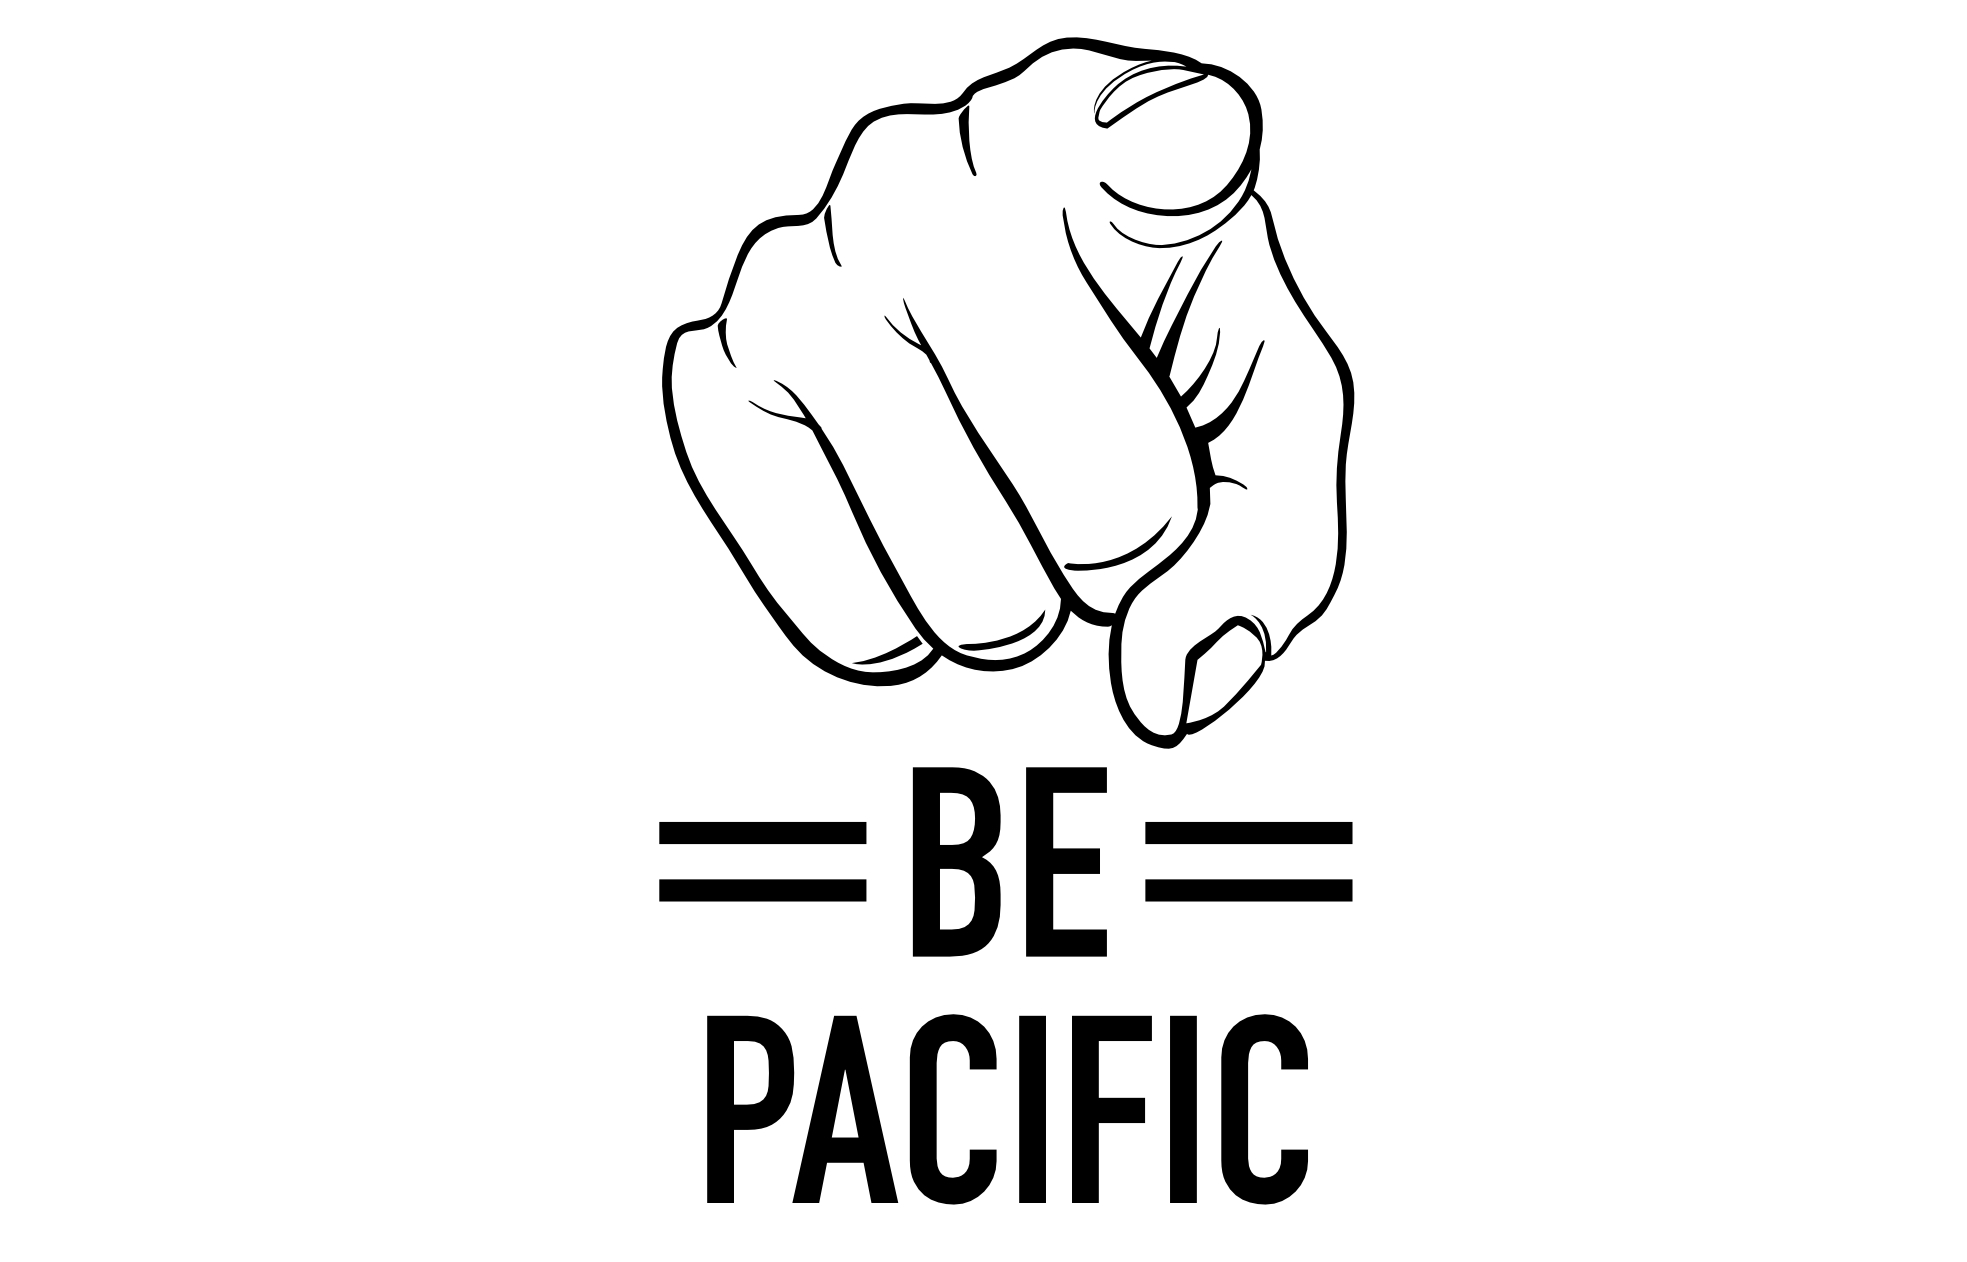 Be Pacific!